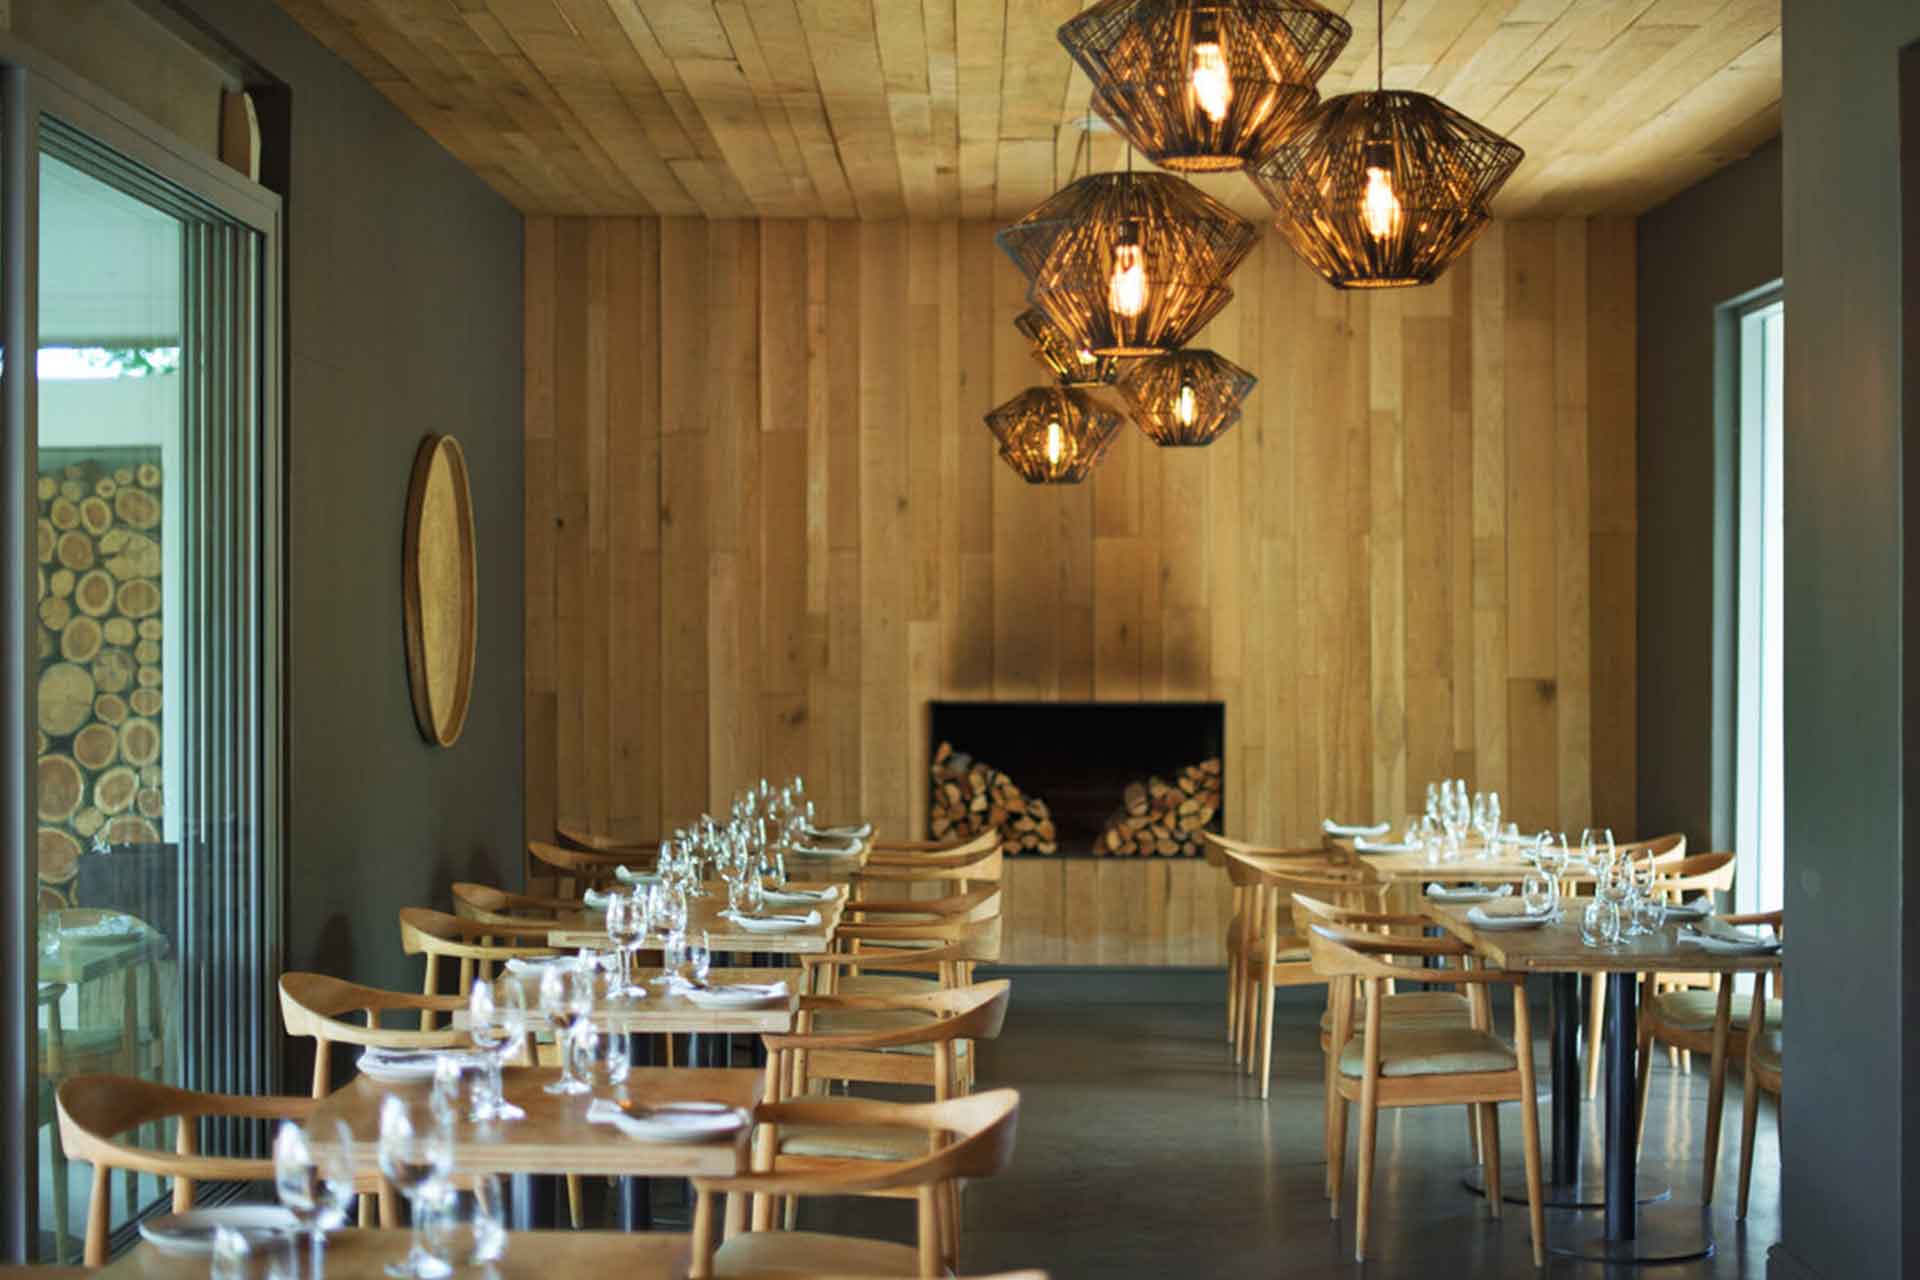 The dining room at Chefs Warehouse at Maison – one of the top Cape Winelands restaurants.